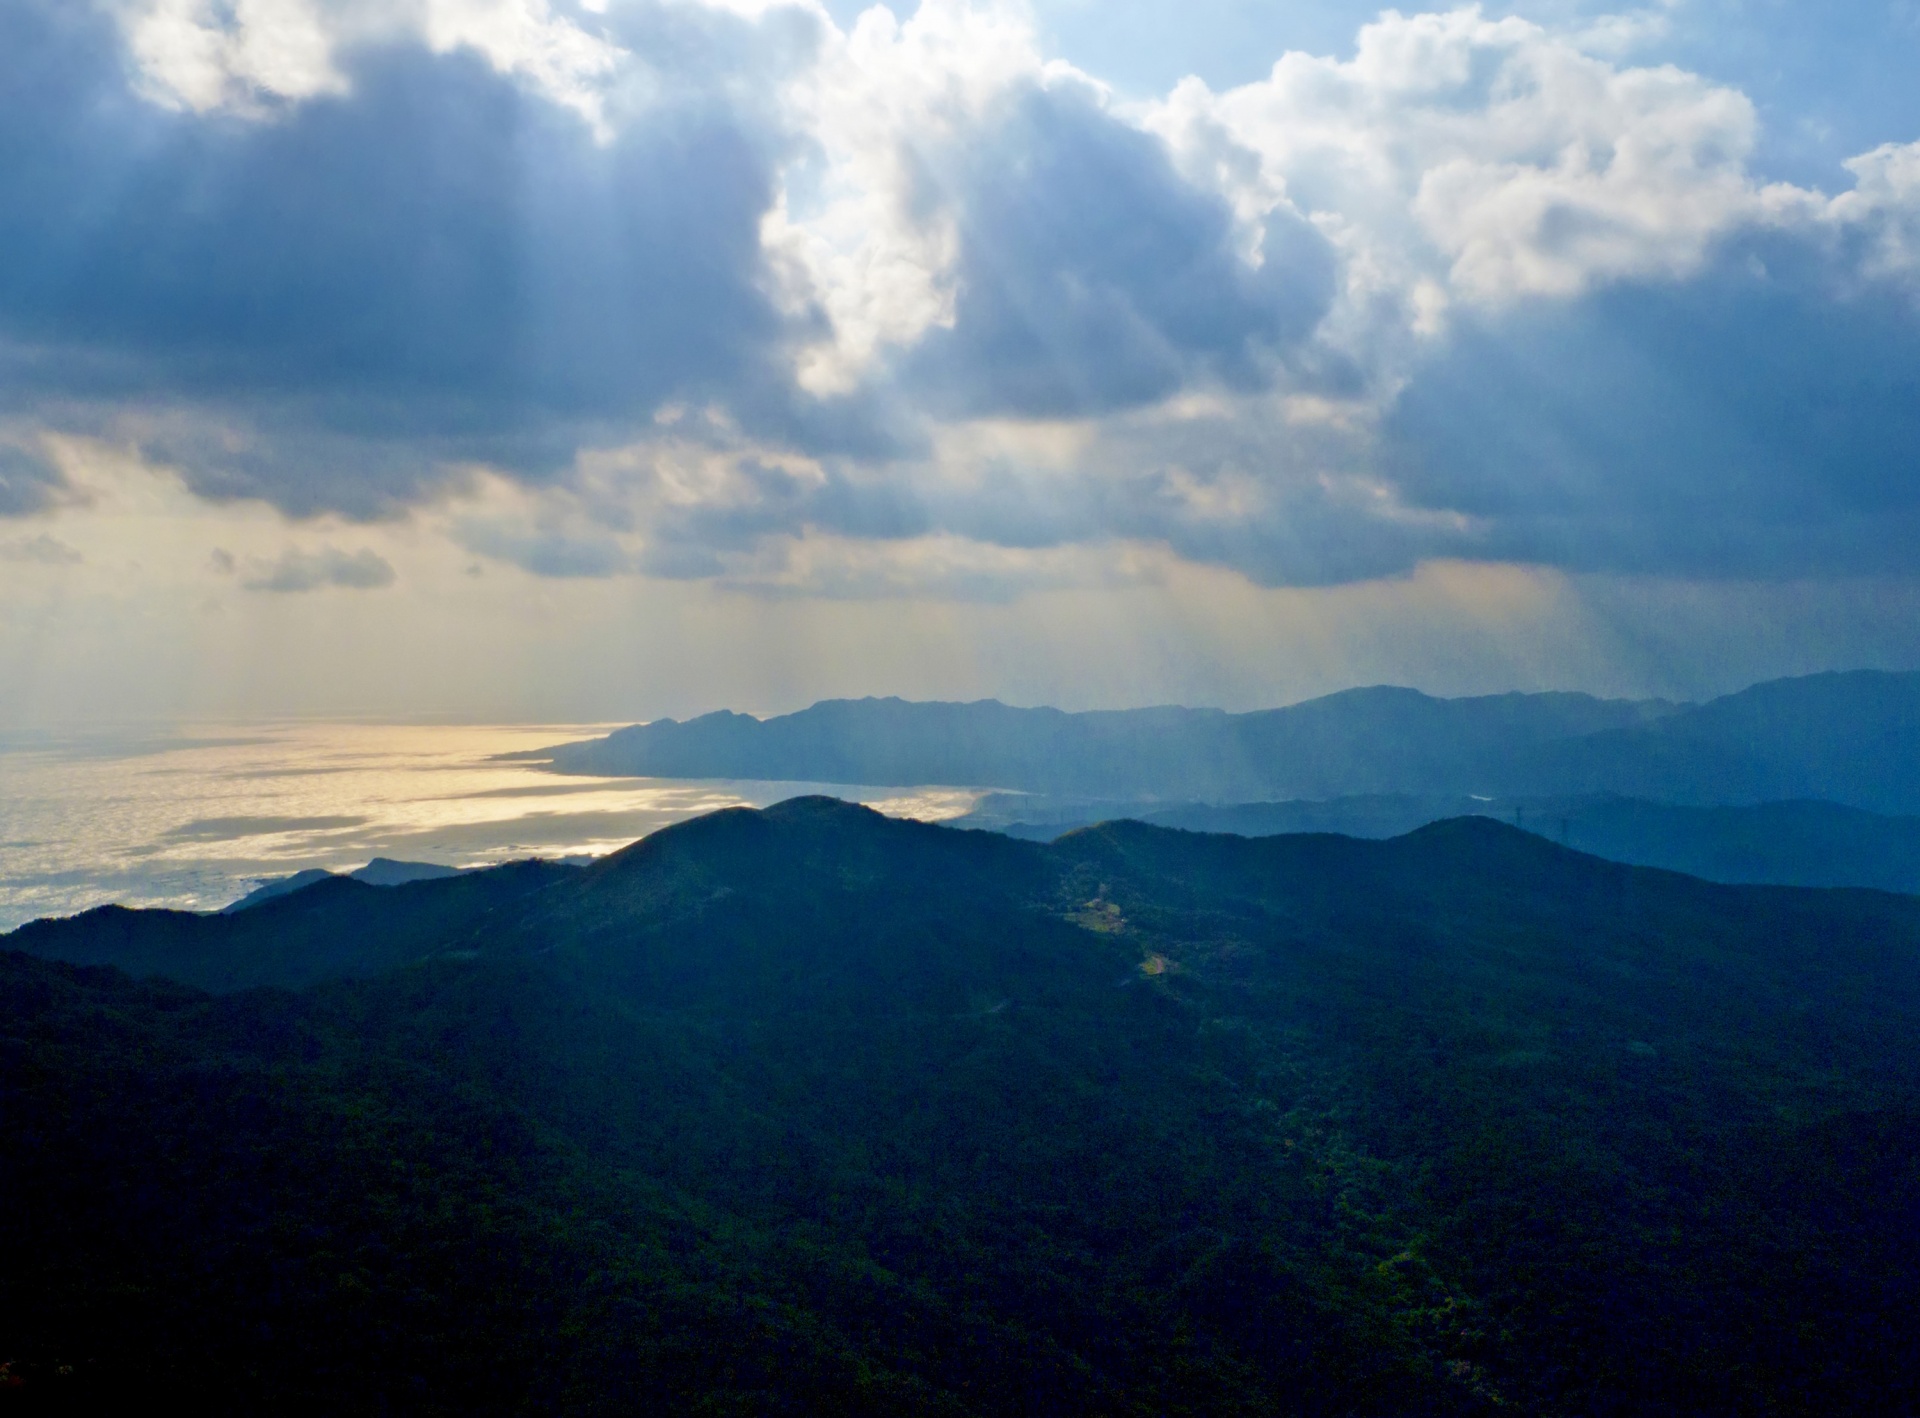 The north-east coast of Taiwan at Fulong Beach, as seen from a peak in Shuangxi district.